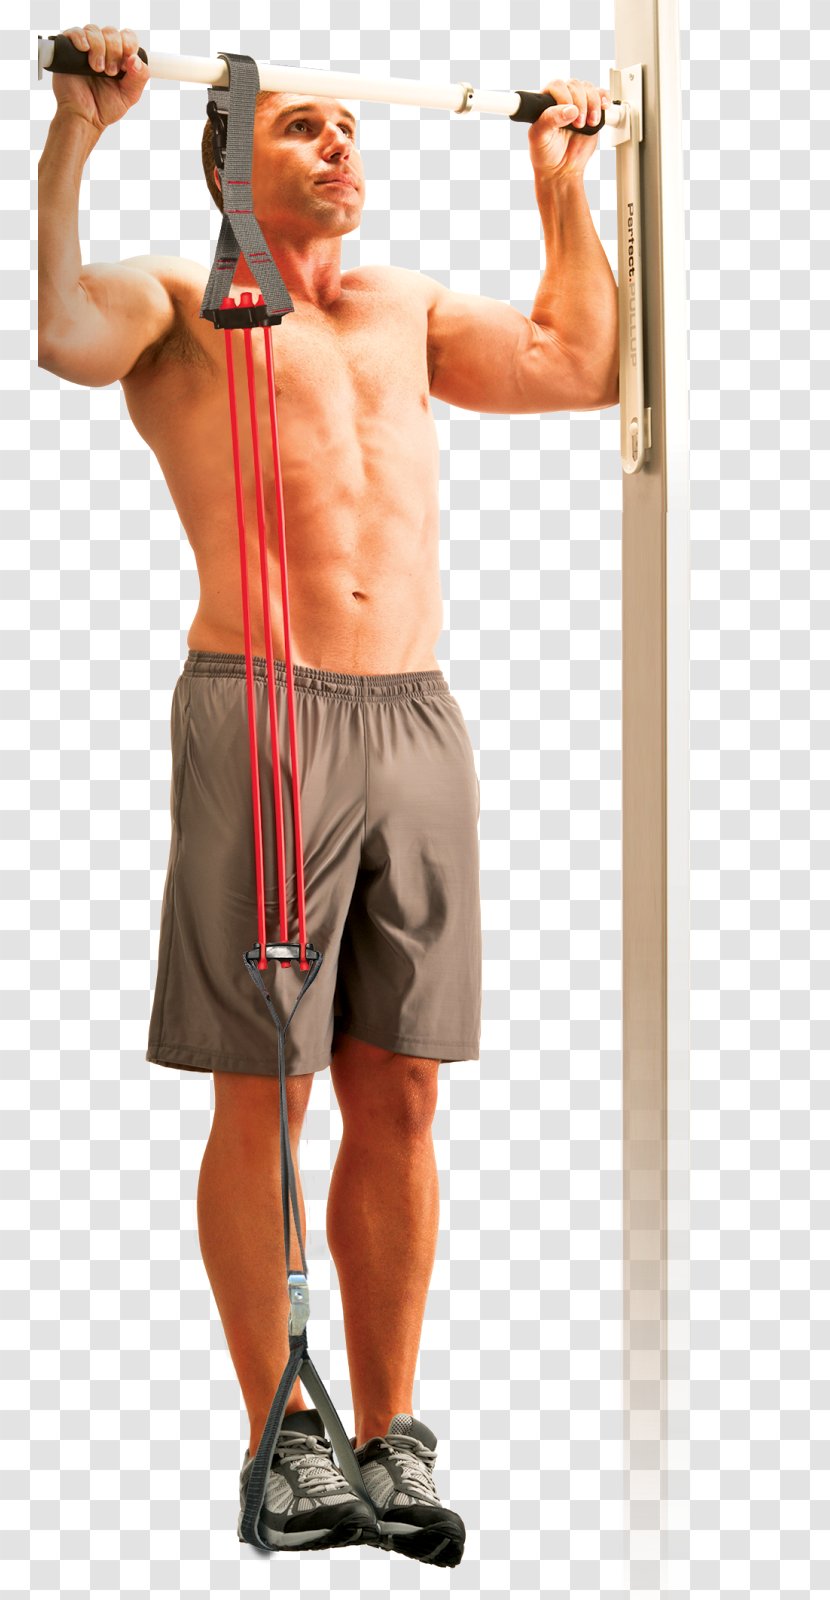 Weight Training Pull-up Exercise Equipment Barbell - Cartoon Transparent PNG